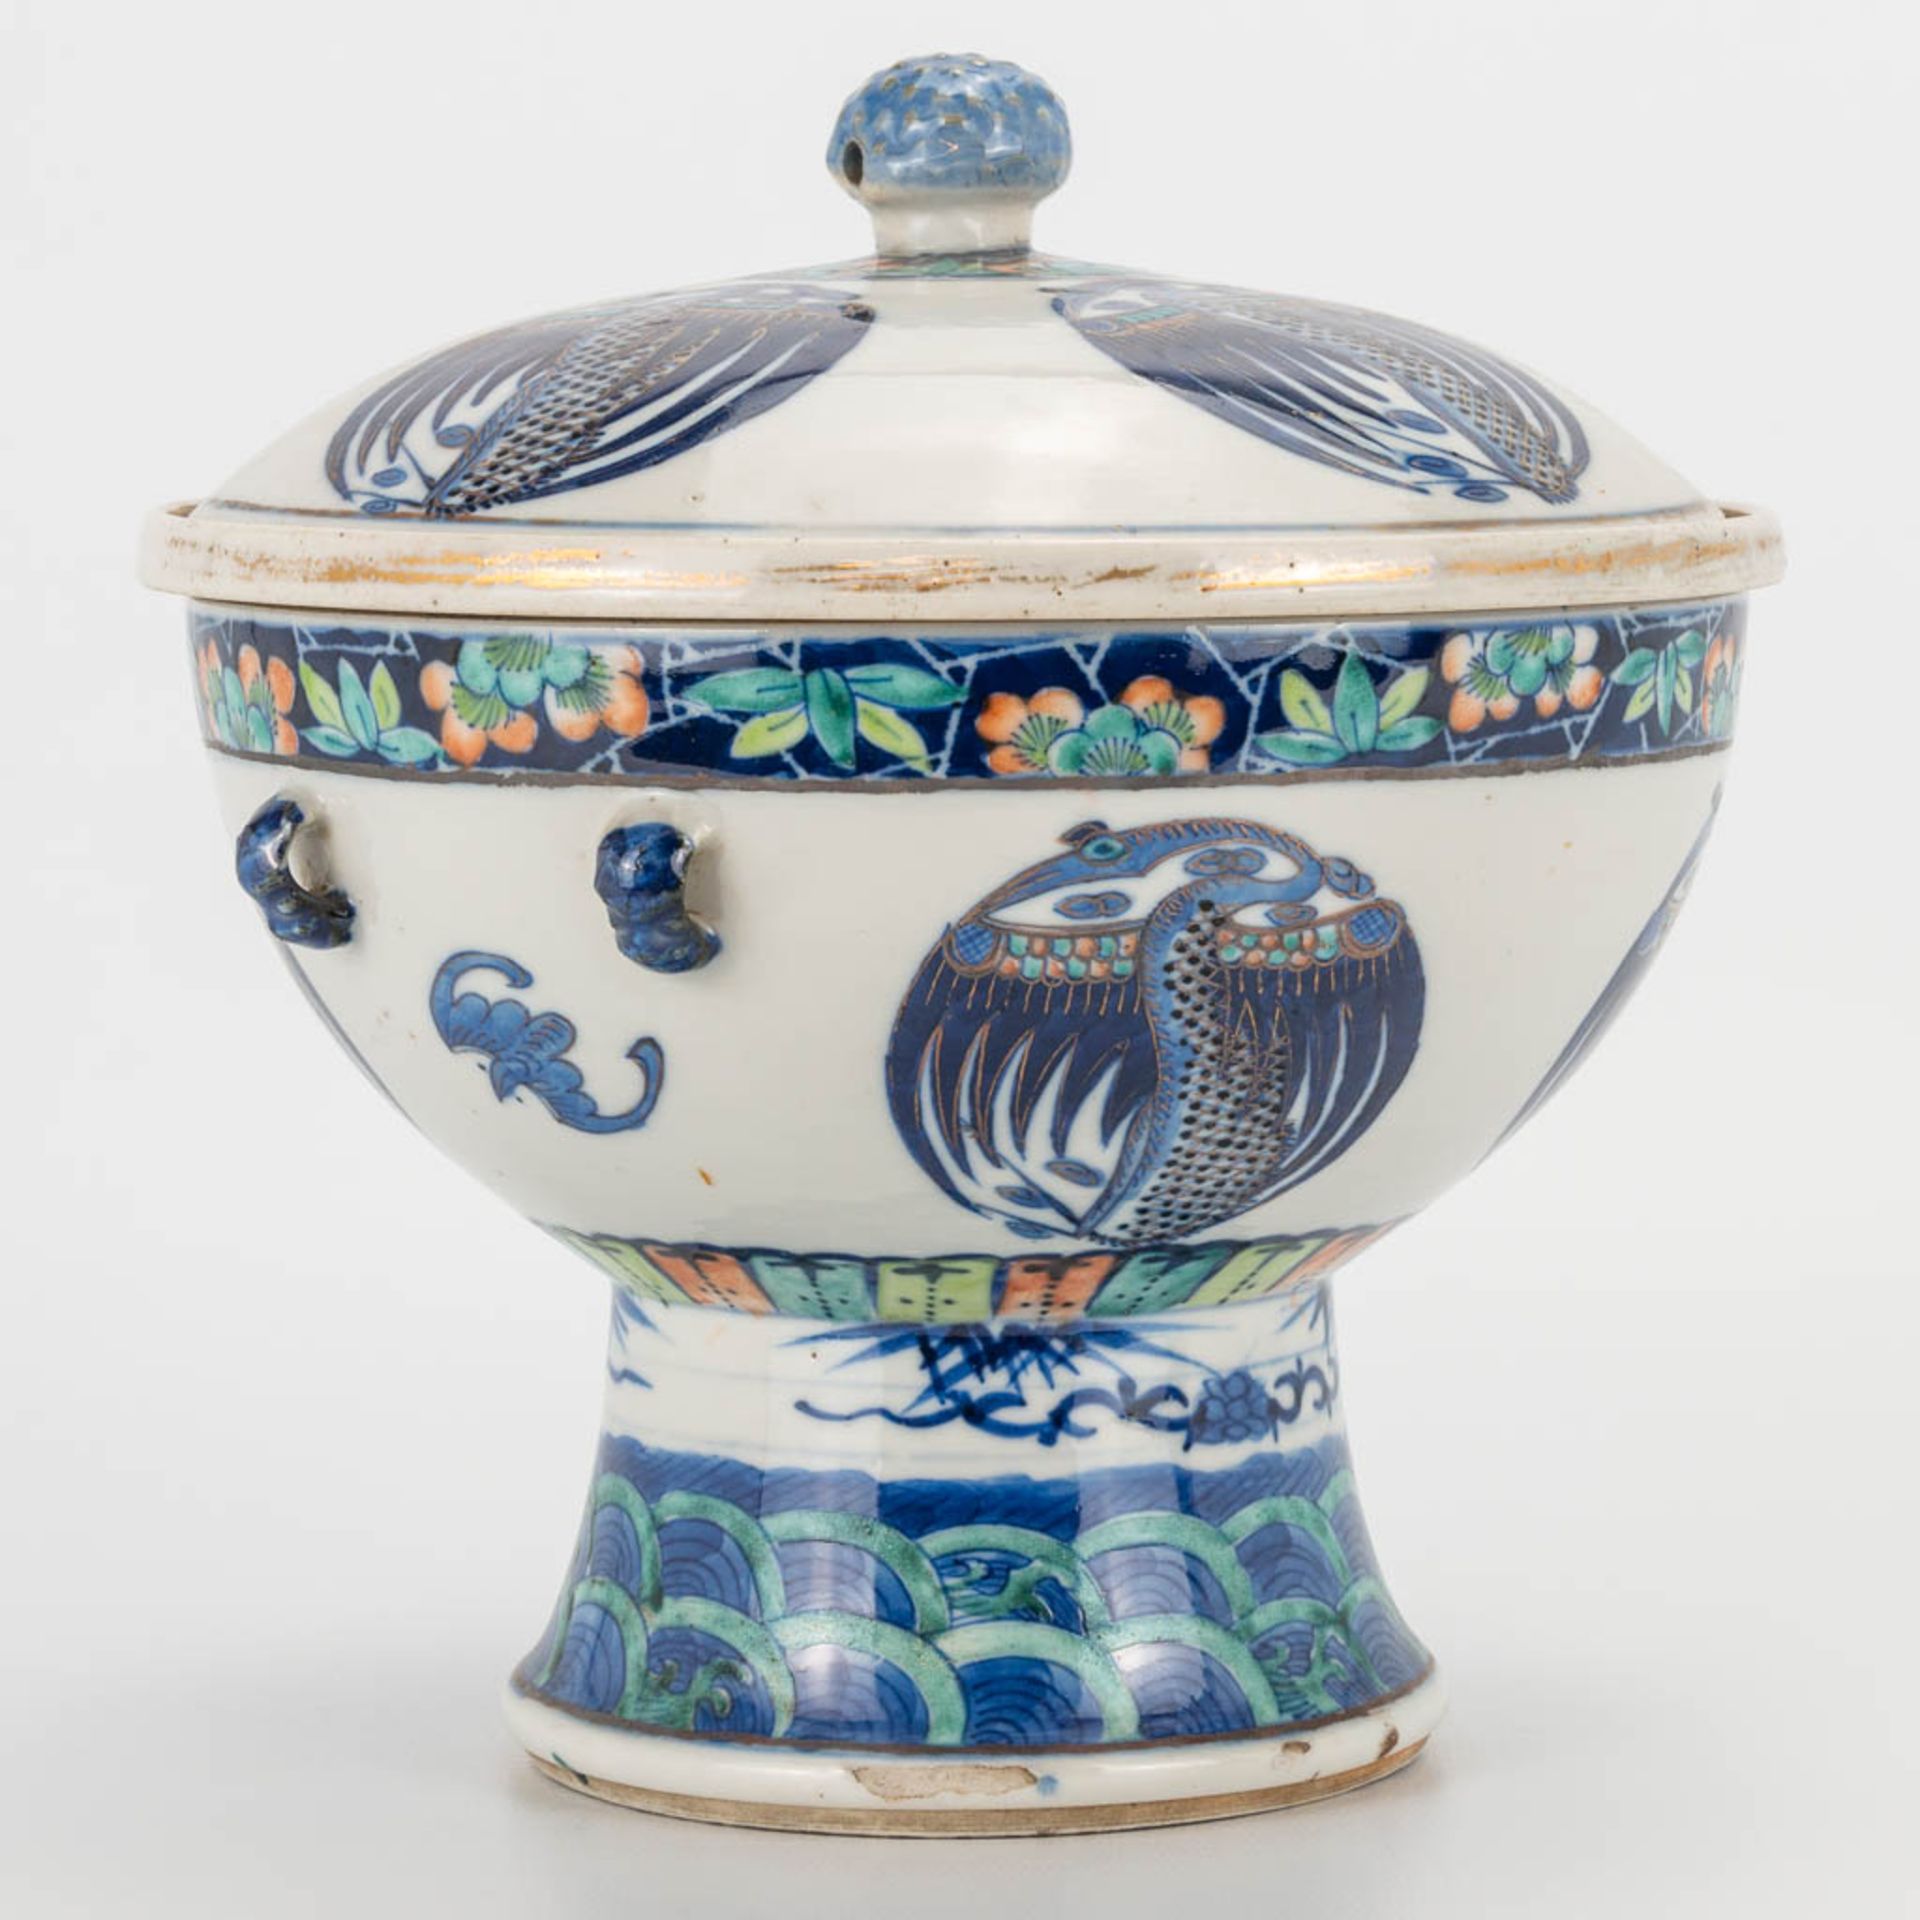 A 'Bain Marie' Douchai made of Chinese porcelain, Tching dinasty, 19th century.Ê (21 x 20 cm) - Image 12 of 16